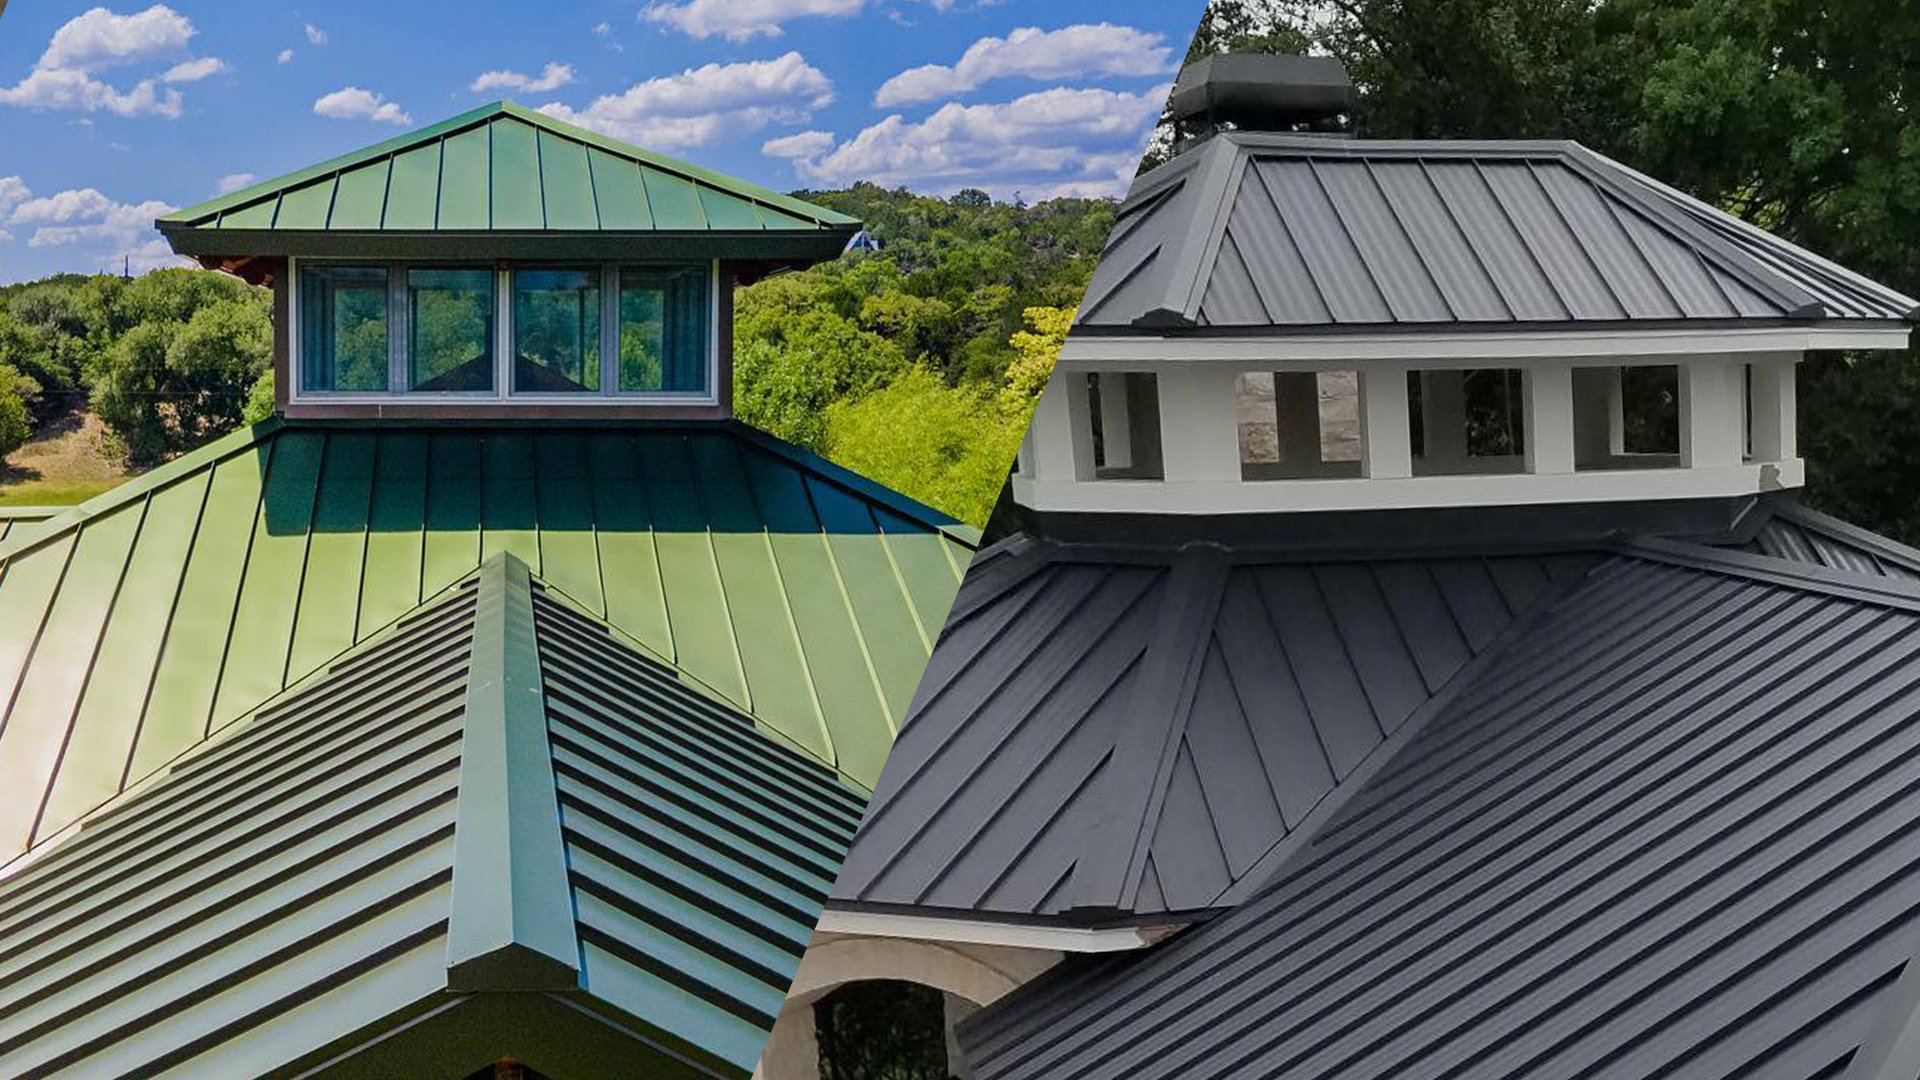 Best Paint For Metal Roof: SMP Paint v PVDF Coatings